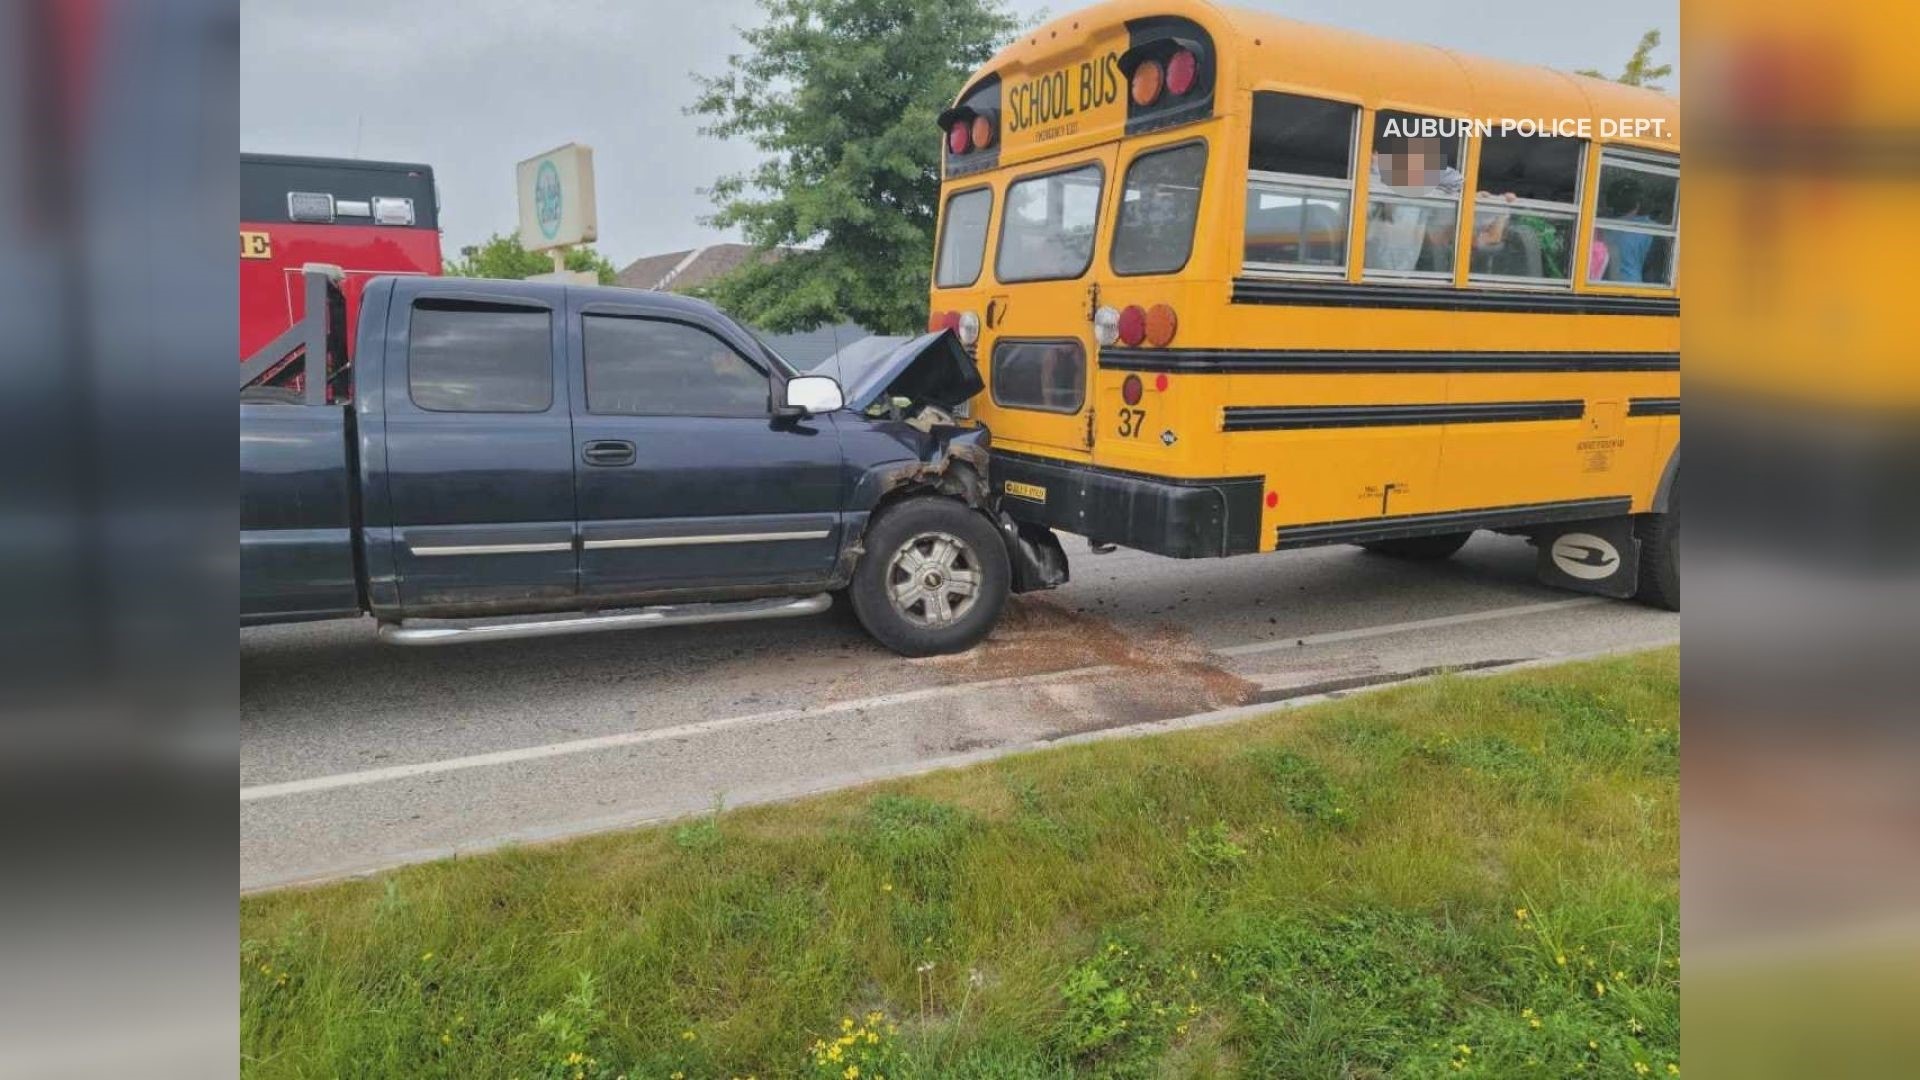 No injuries were reported in the crash, Auburn police said, and the students were eventually taken to school.